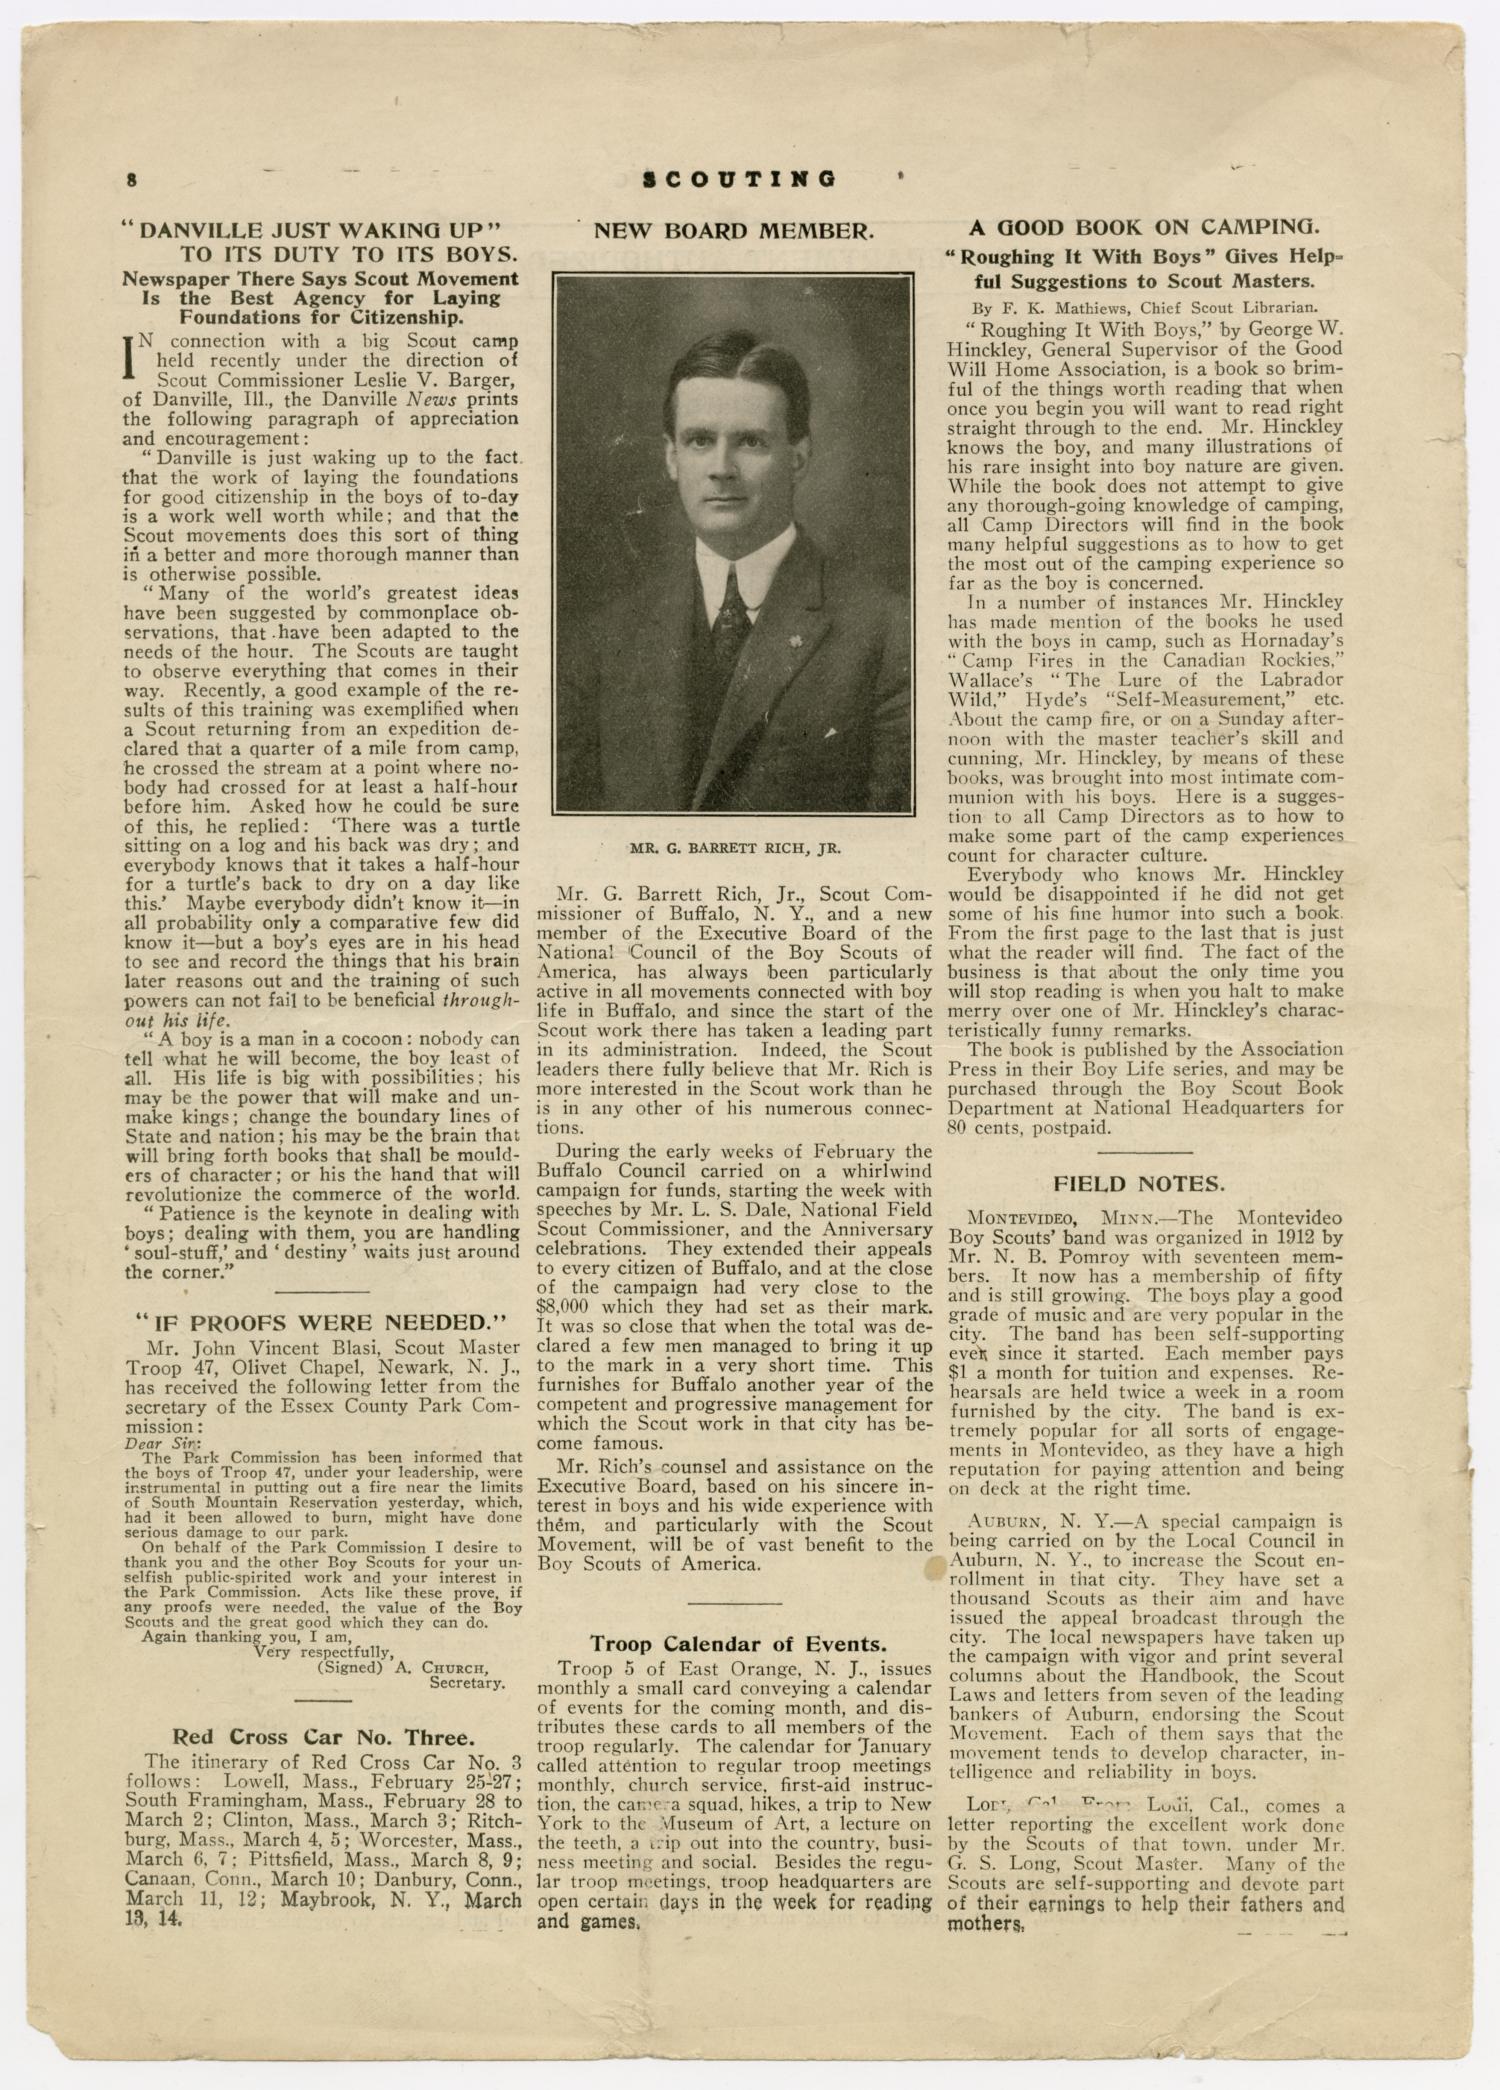 Scouting, Volume 1, Number 20, February 15, 1914
                                                
                                                    8
                                                